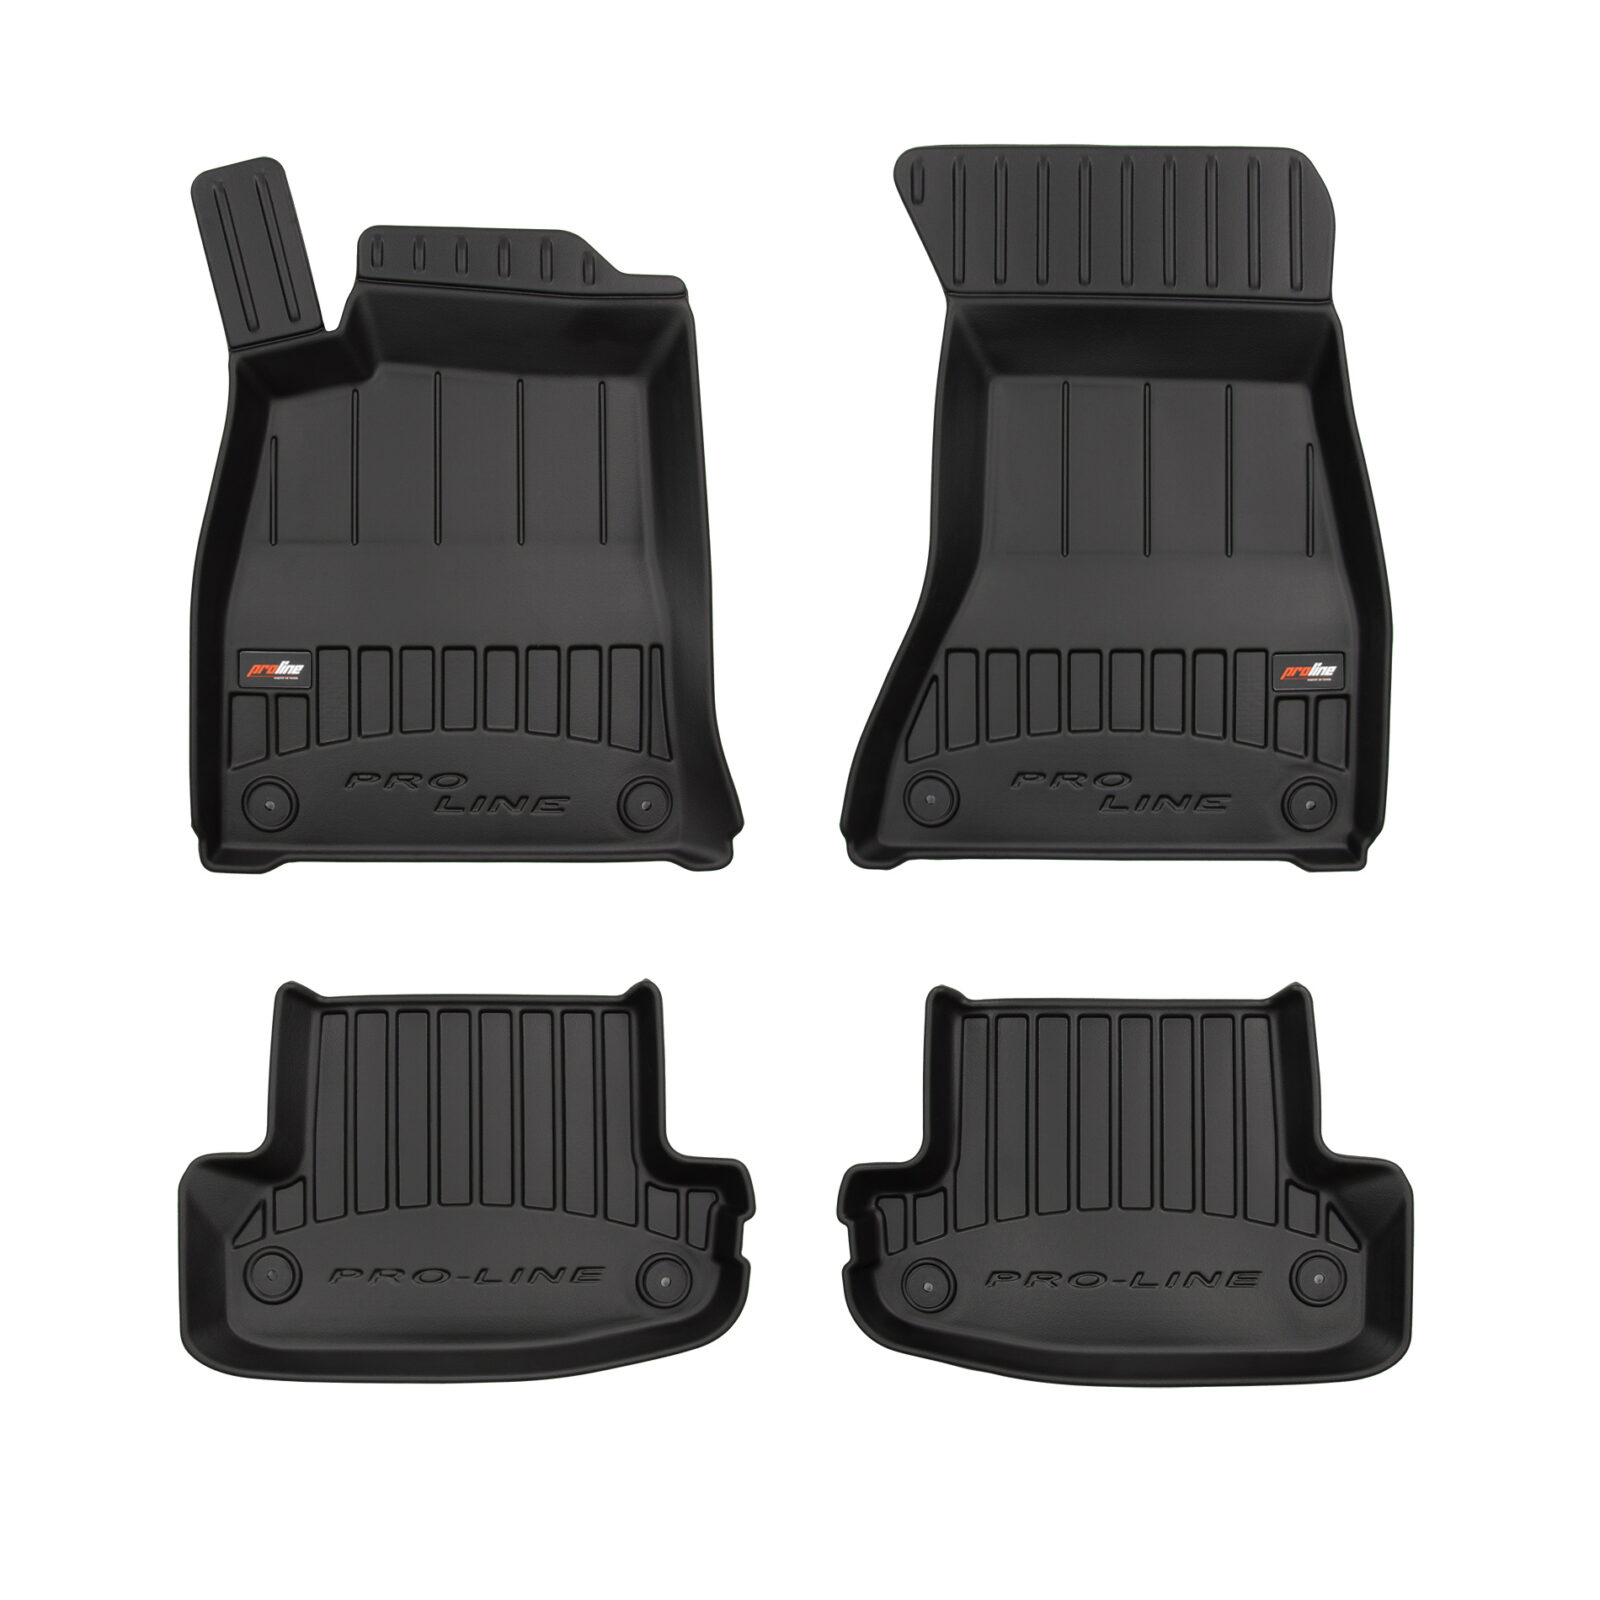 Car mats 2016 since Audi for ProLine tailor-made A5 F5